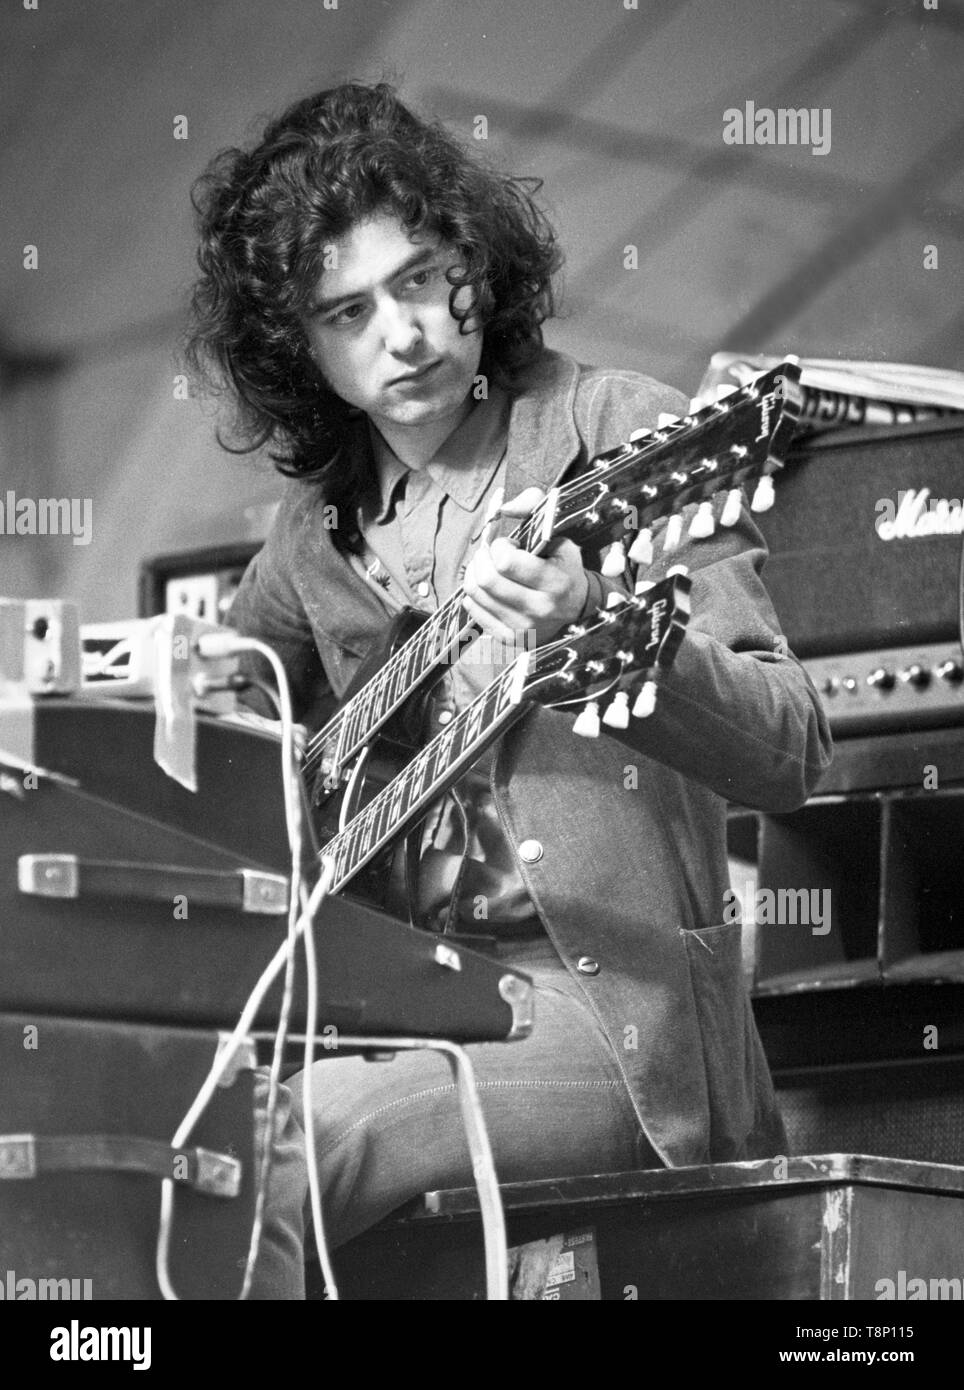 Amsterdam, Netherlands - MAY 27: Jimmy Page of Led Zeppelin during sound  check on stage at Oude Rai on 27th May 1972 in Amsterdam, Netherlands.  (Photo by Gijsbert Hanekroot Stock Photo - Alamy